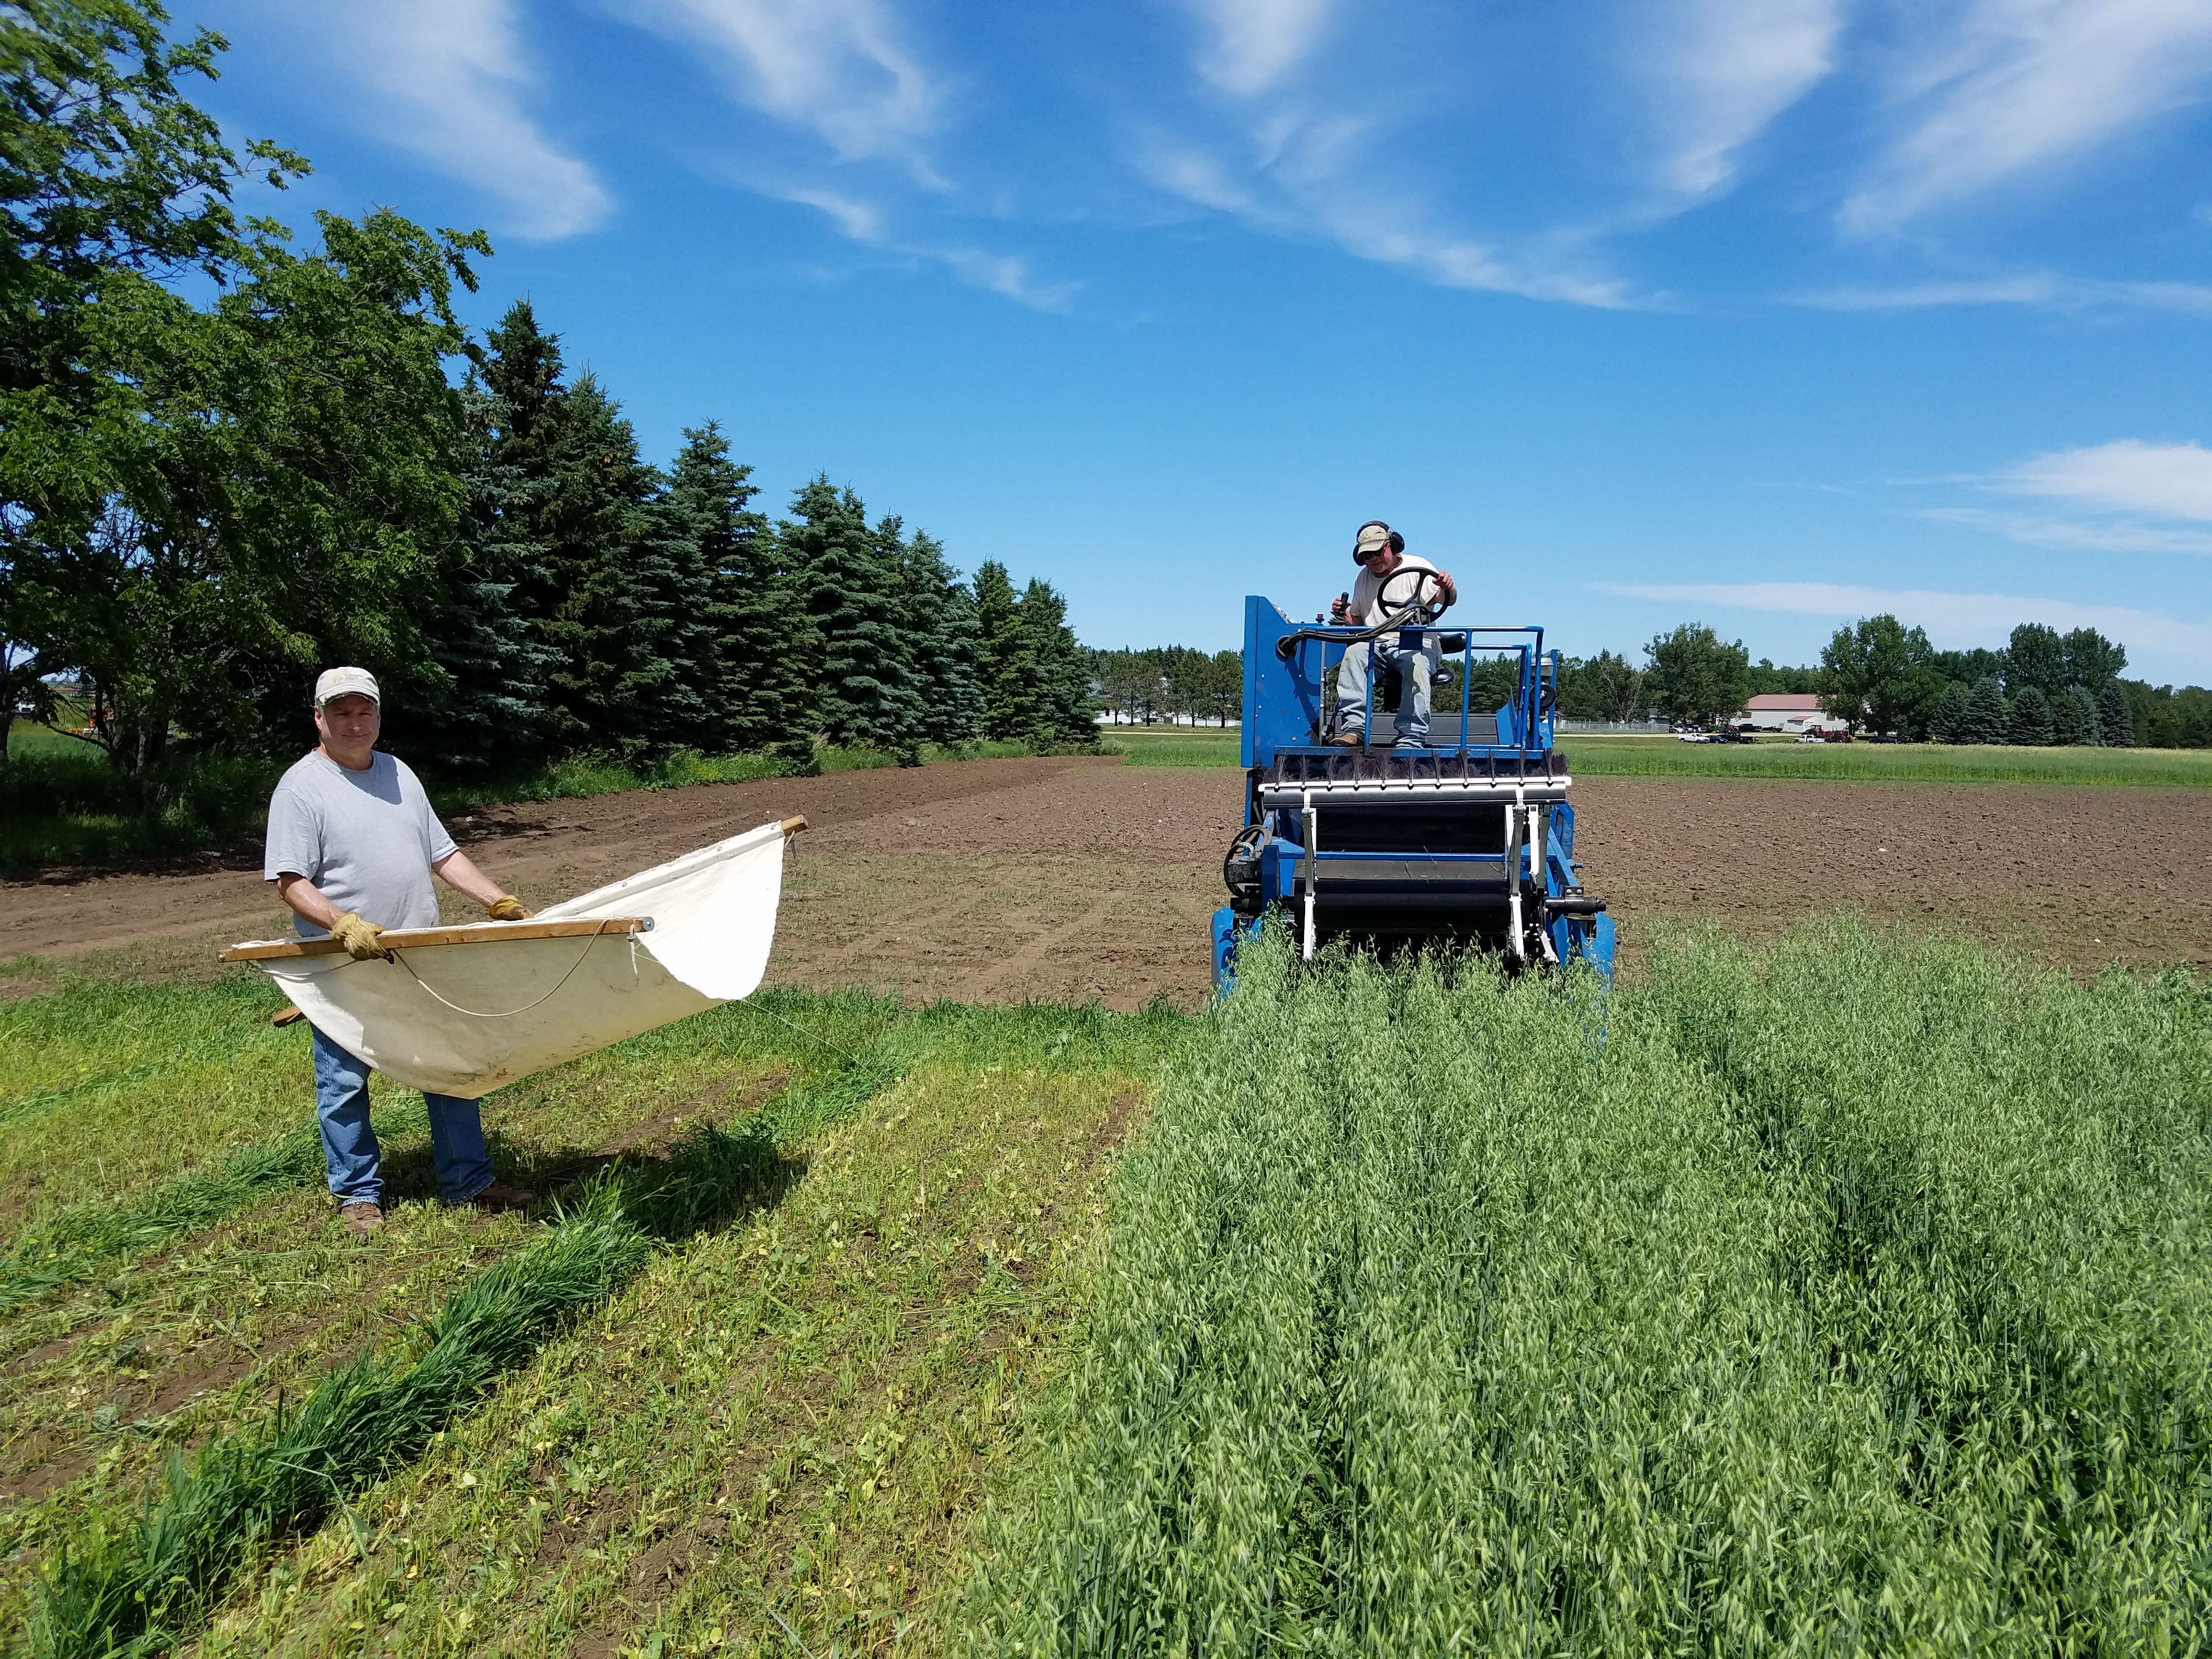 Steve Zwinger, organic research specialist at the Carrington Research Extention Center (on the tractor) and Steve Schaubert, an agronomy technician at the center, are harvesting an organic oat/pea intercropping trial plot. (NDSU photo)